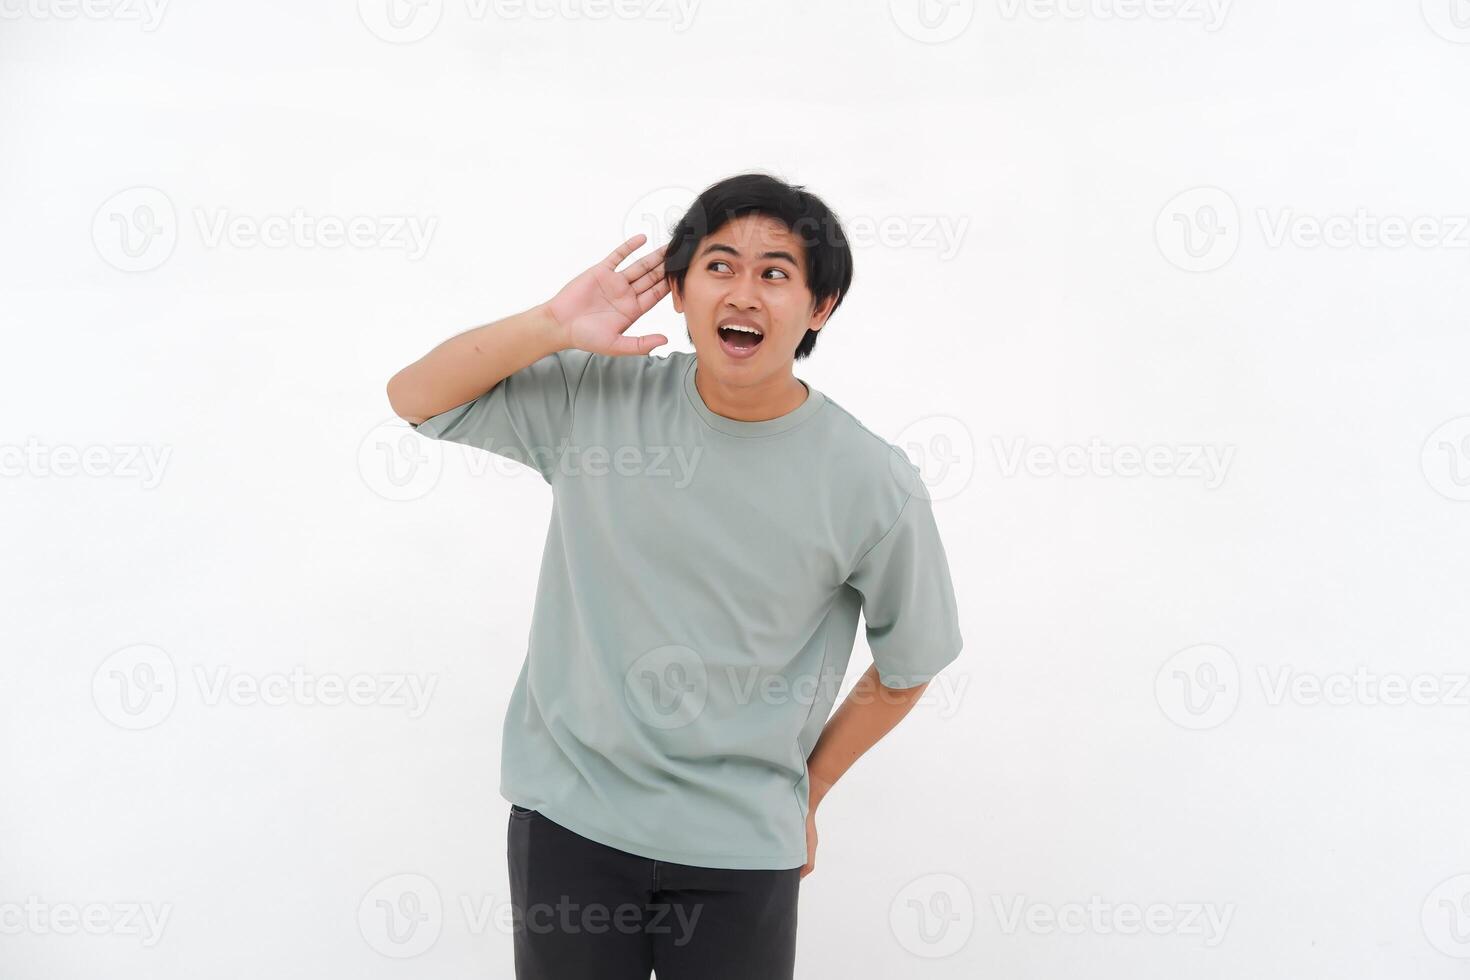 A young Asian man, an employee in a tshirt, is seen enthusiastically listening with his hand to his ear against a white background. photo